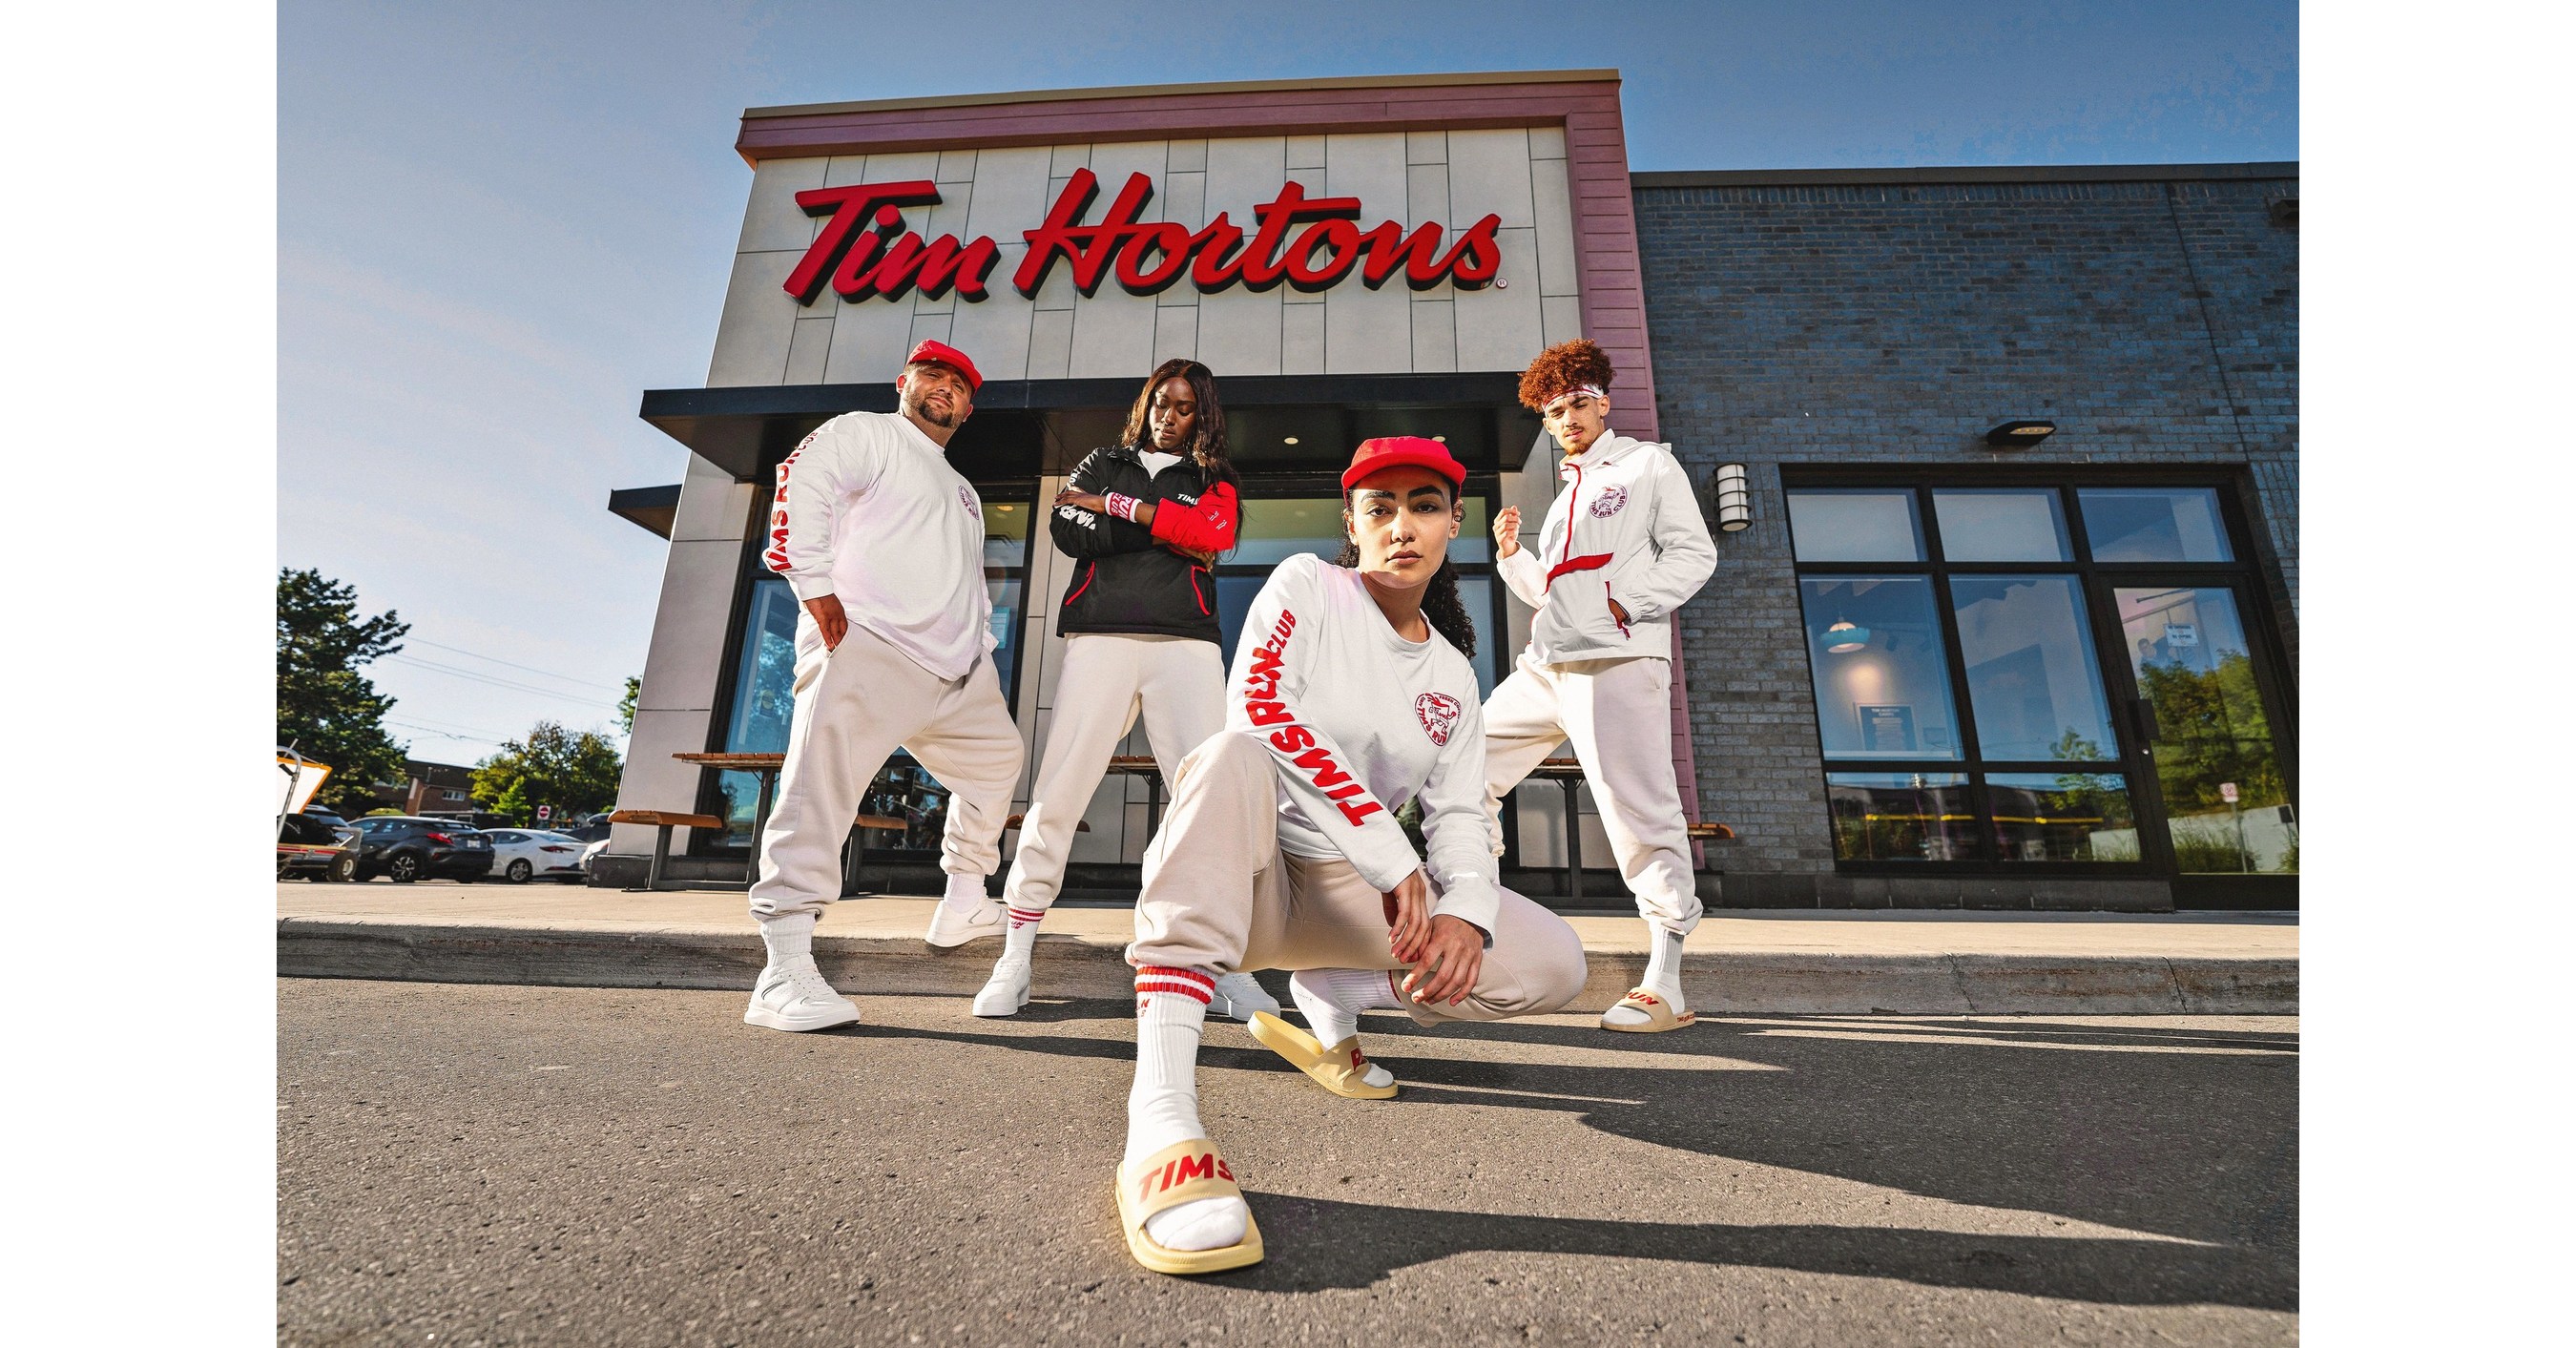 In Canada, they chase Tim Hortons cups - The Boston Globe